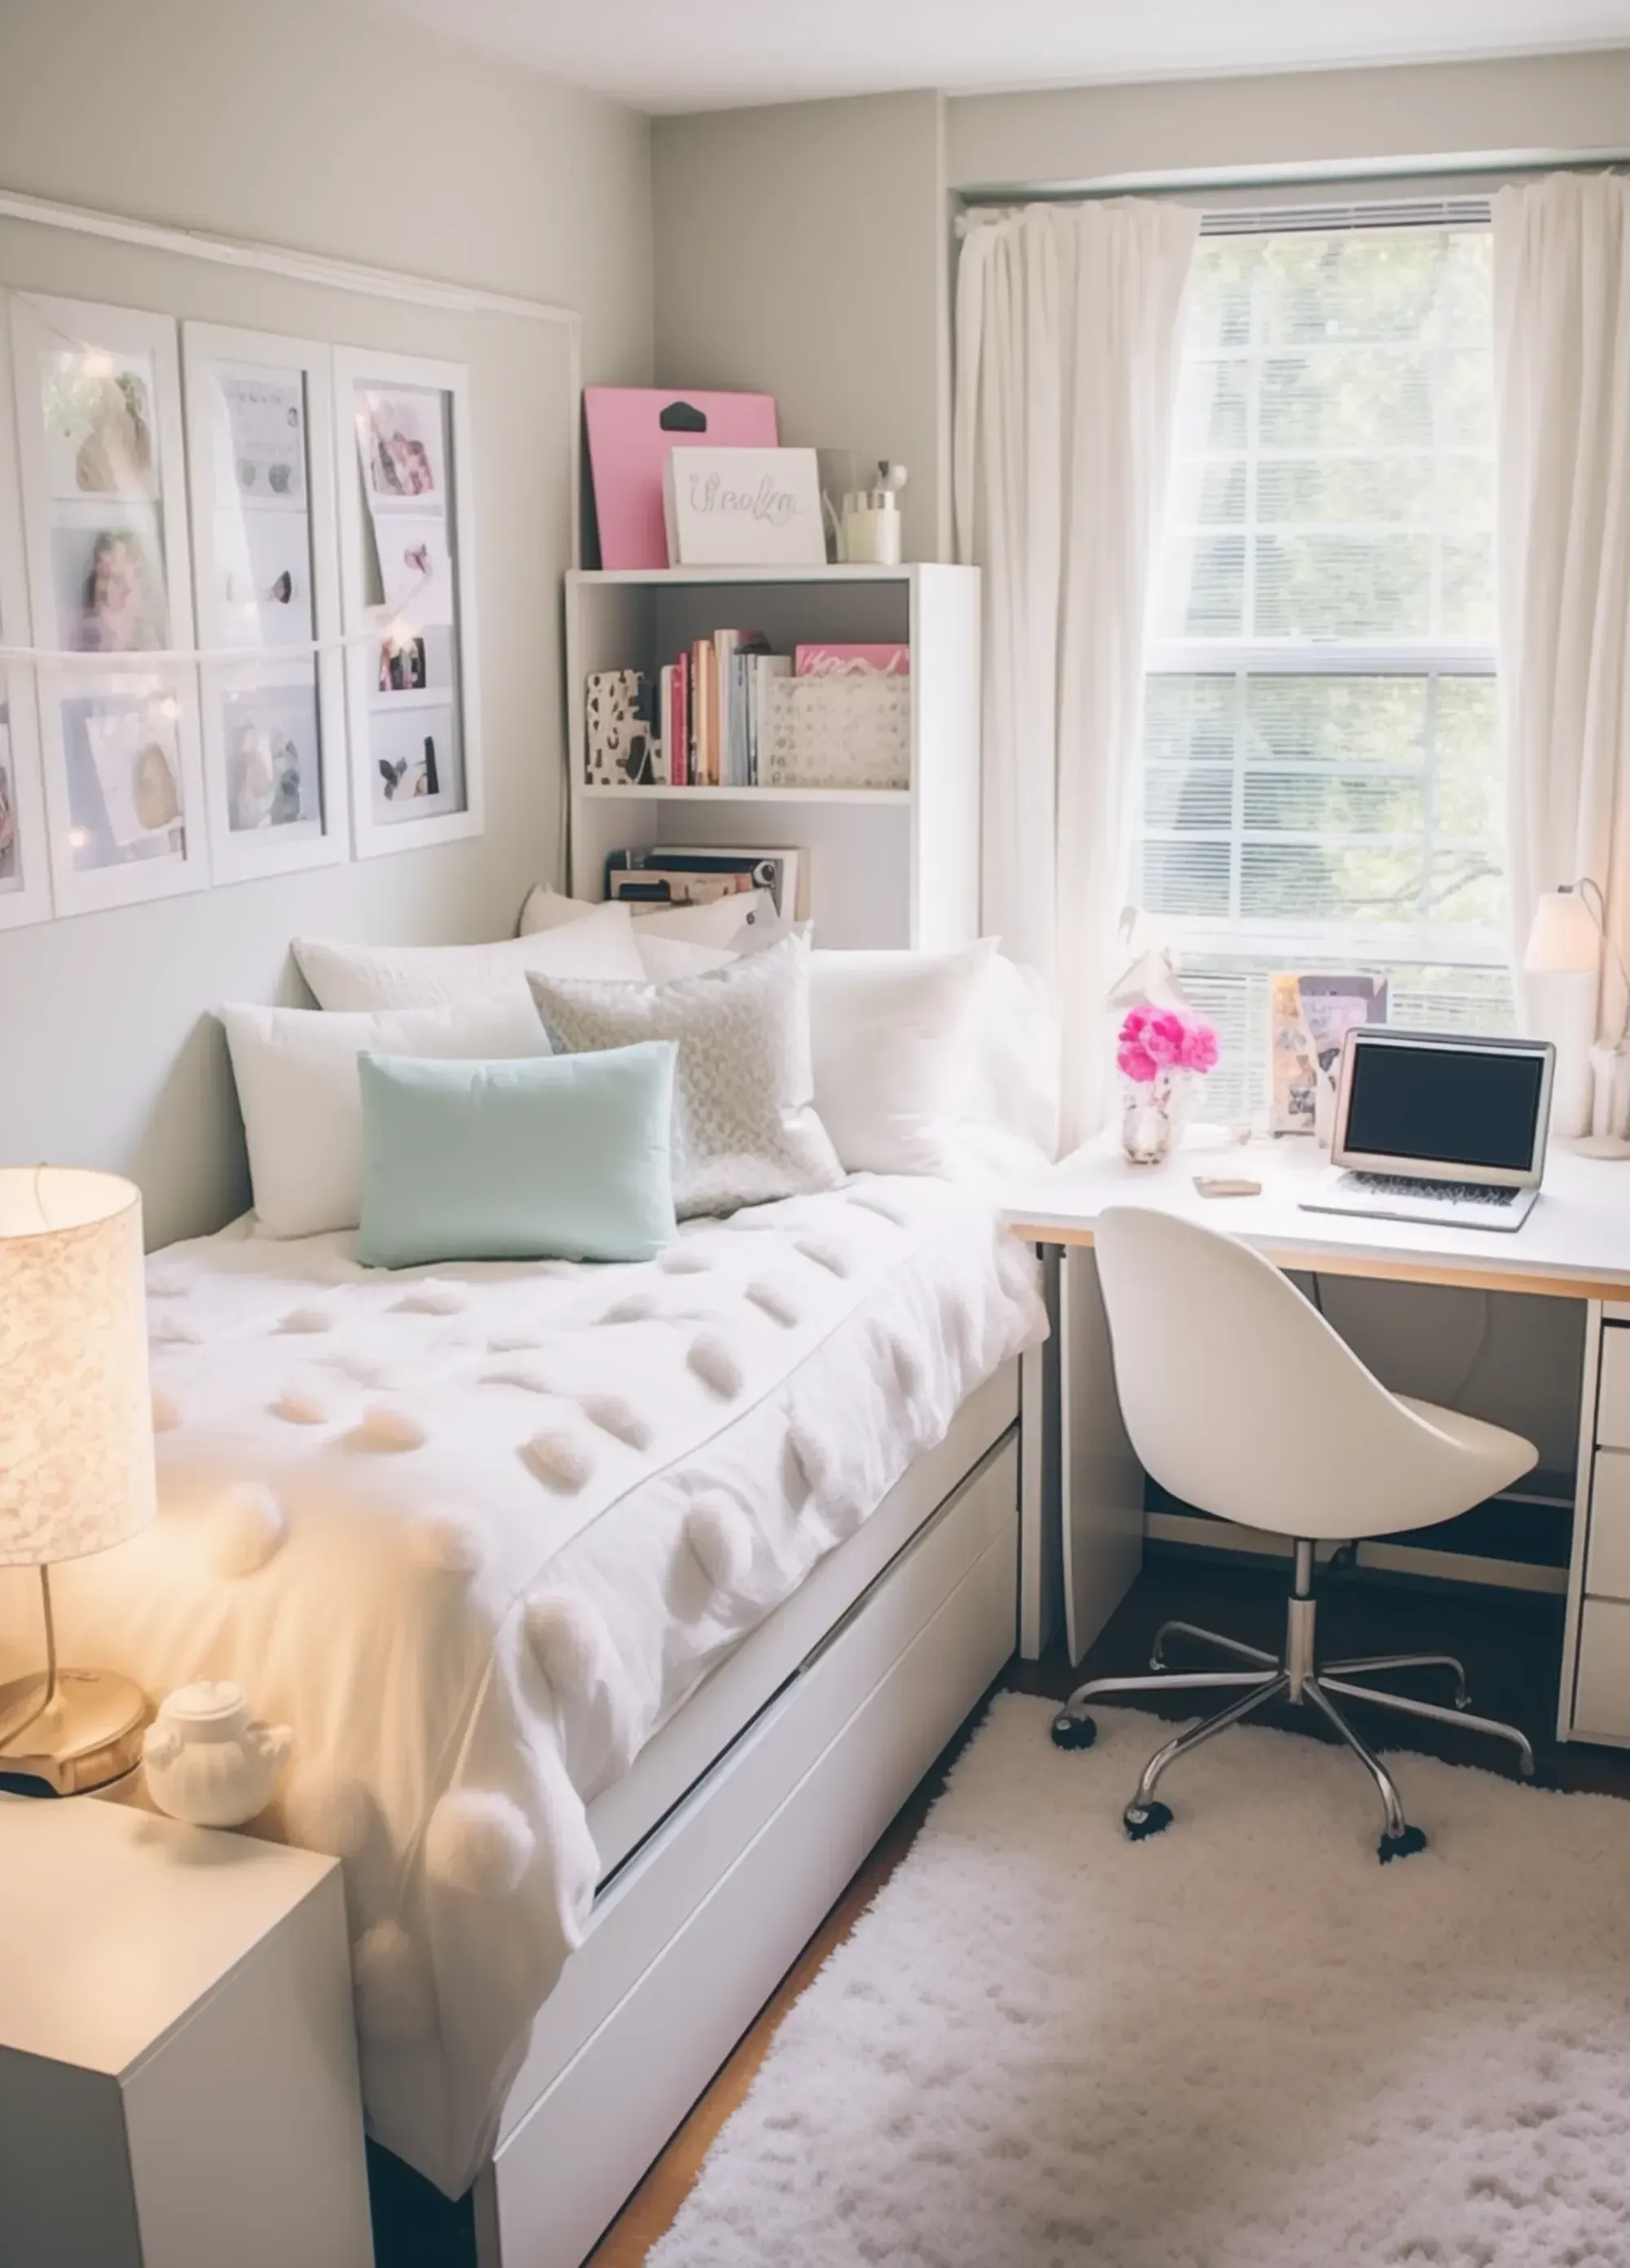 A dorm room with a white and pastel color scheme